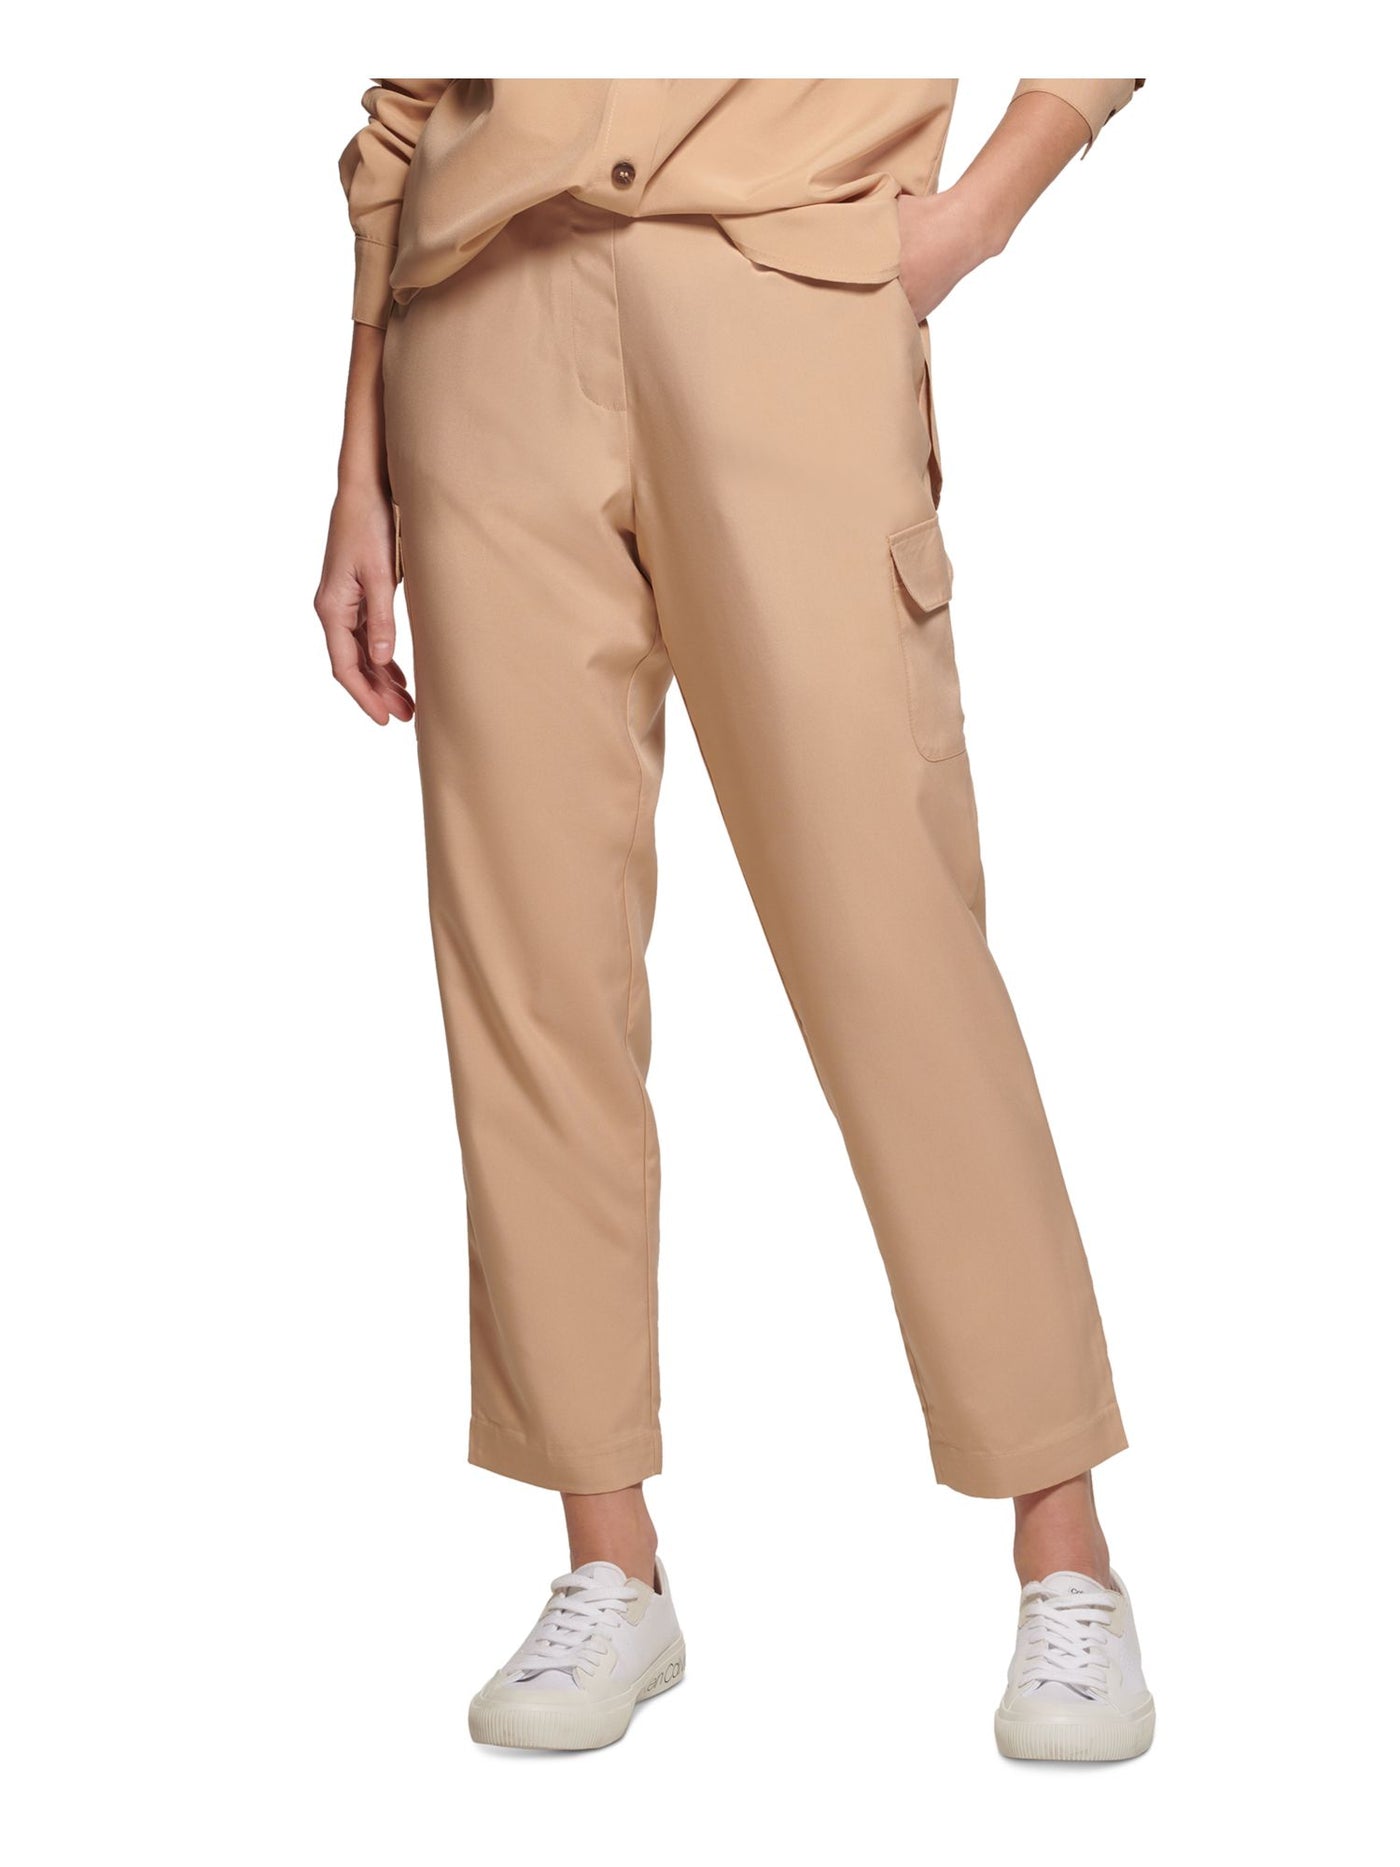 CALVIN KLEIN Womens Beige Pocketed Pull On Cargo Pants L